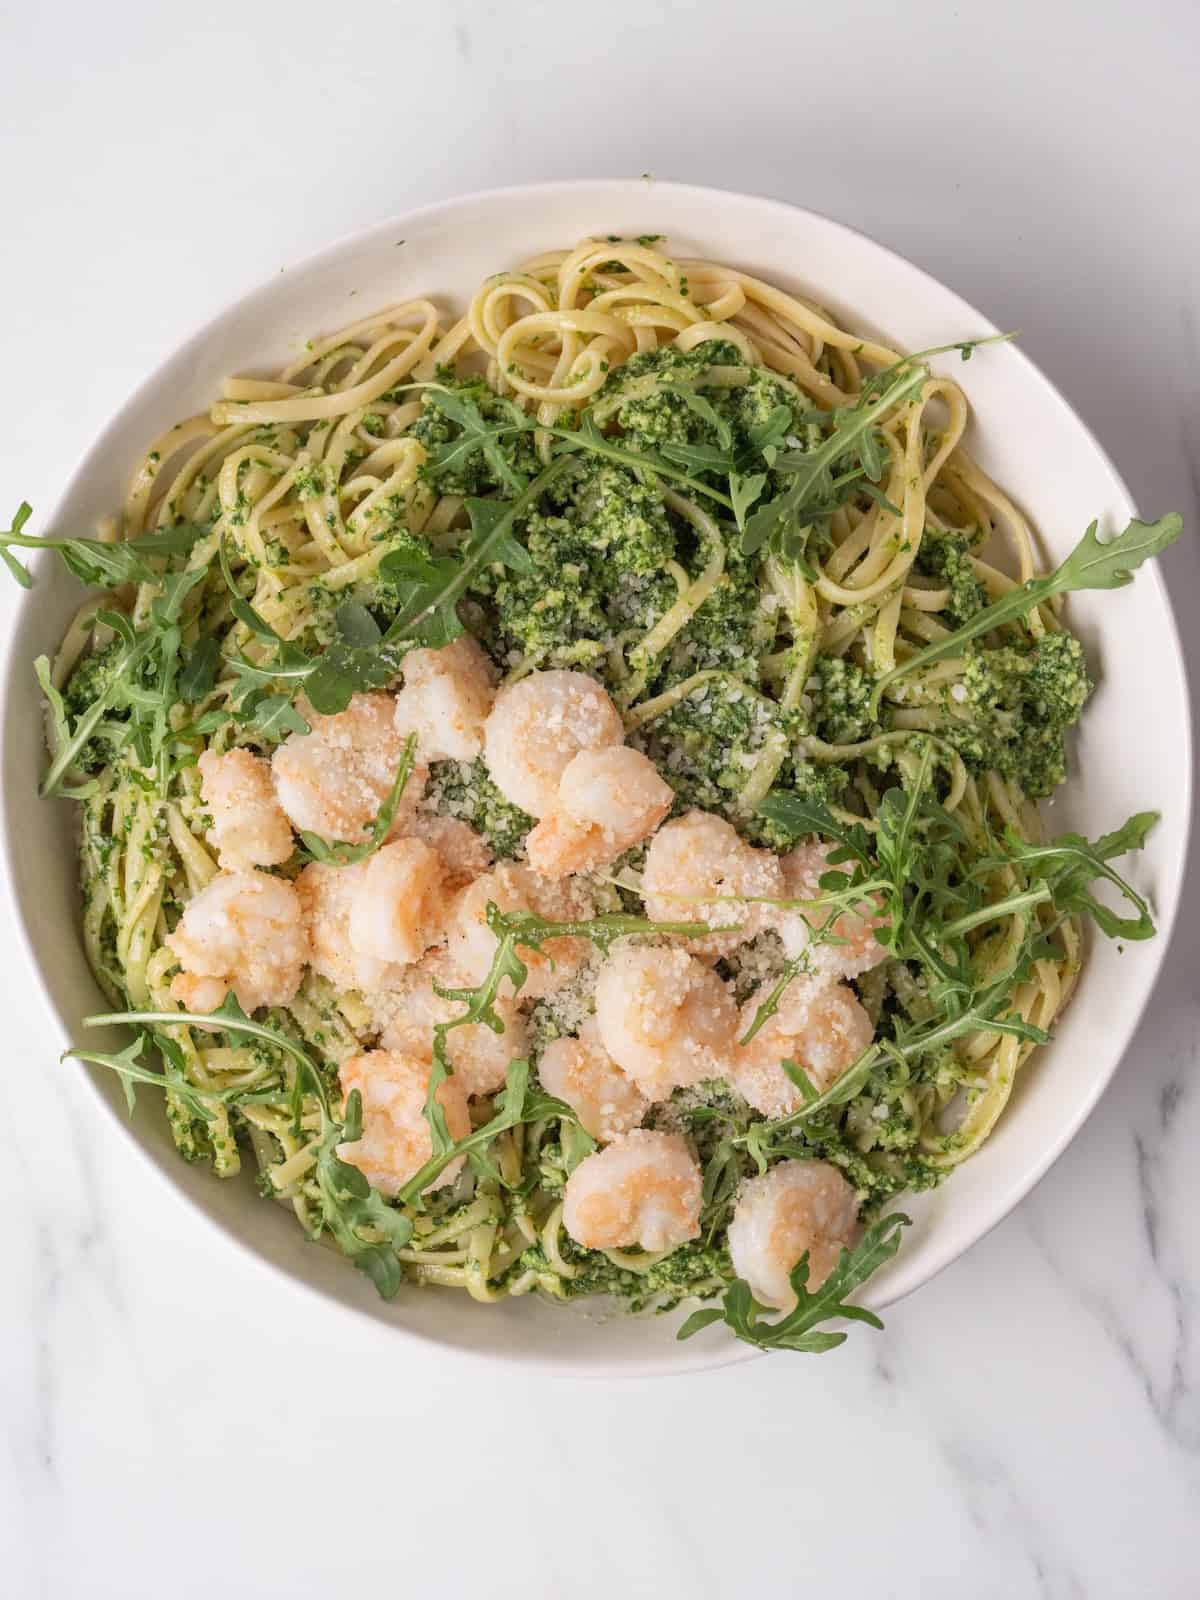 A large glass mixing bowl with cooked linguine and arugula pesto tossed together, topped with sautéed shrimp, arugula and grated pecorino romano cheese.